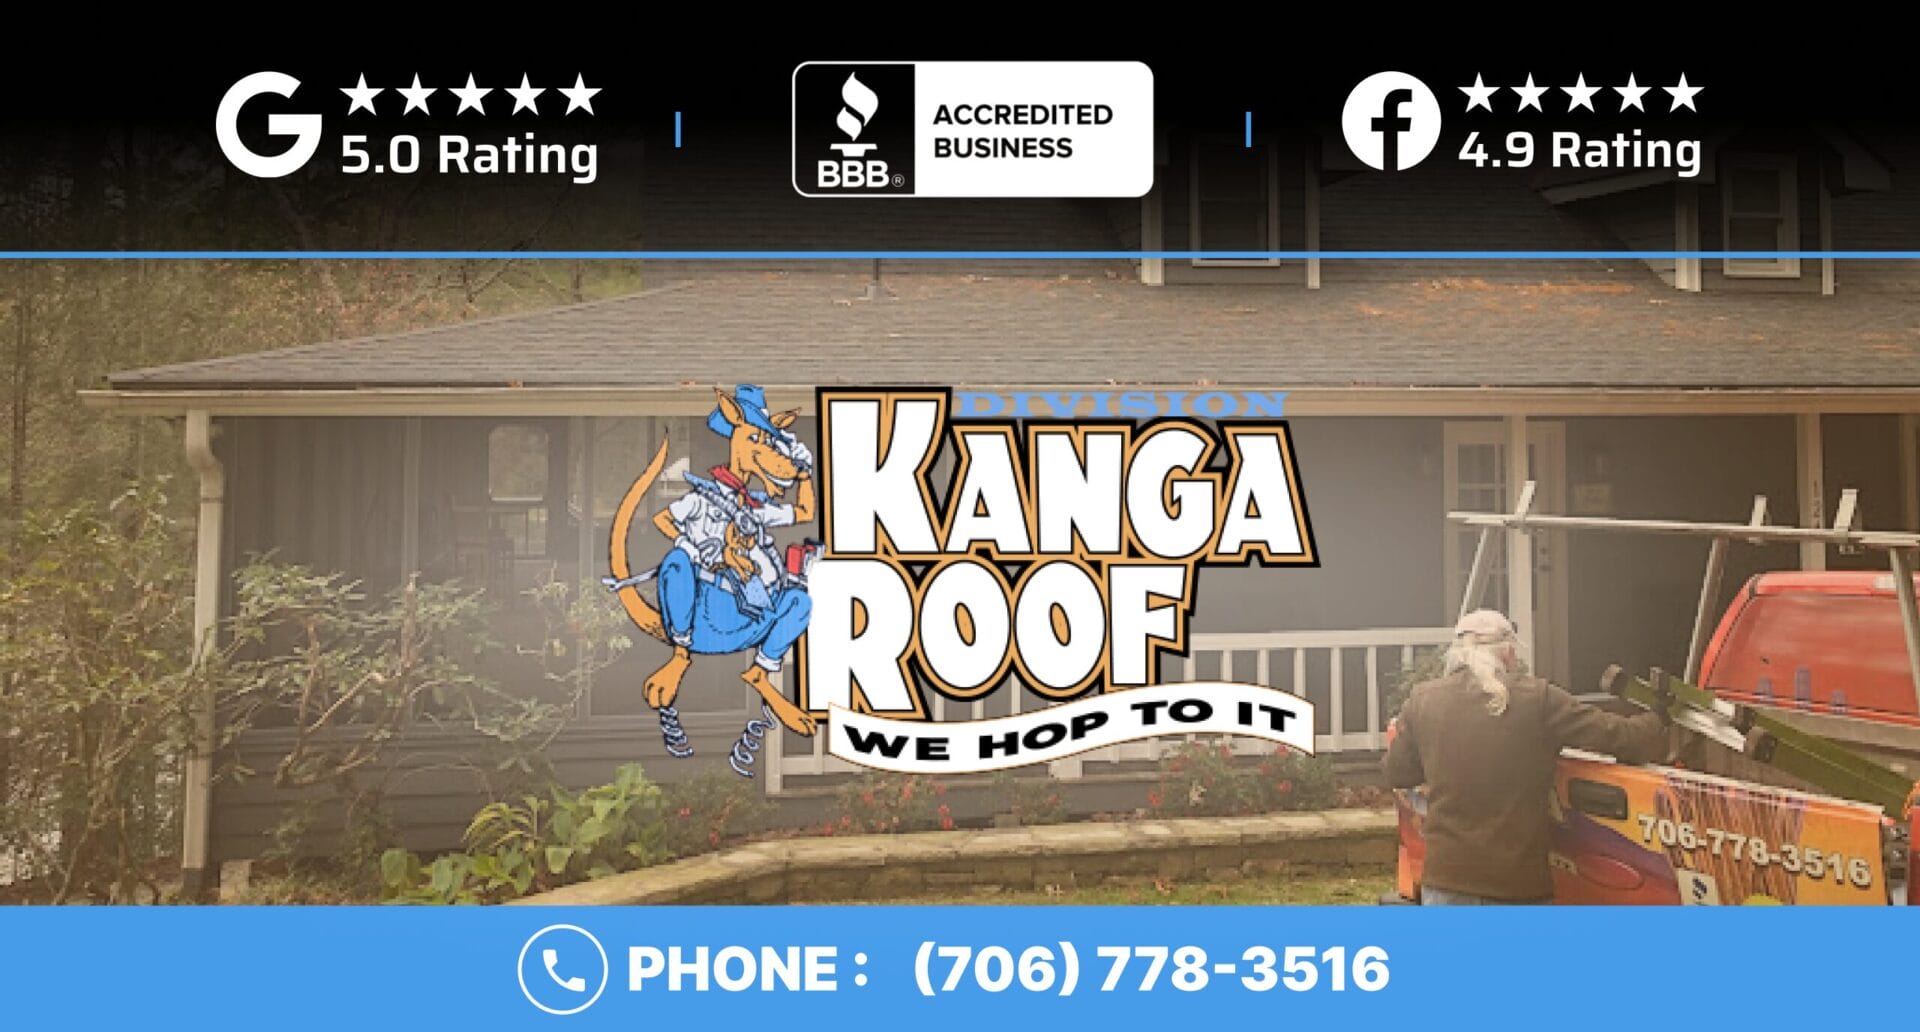 Best local roofing companies in ga that offer financing